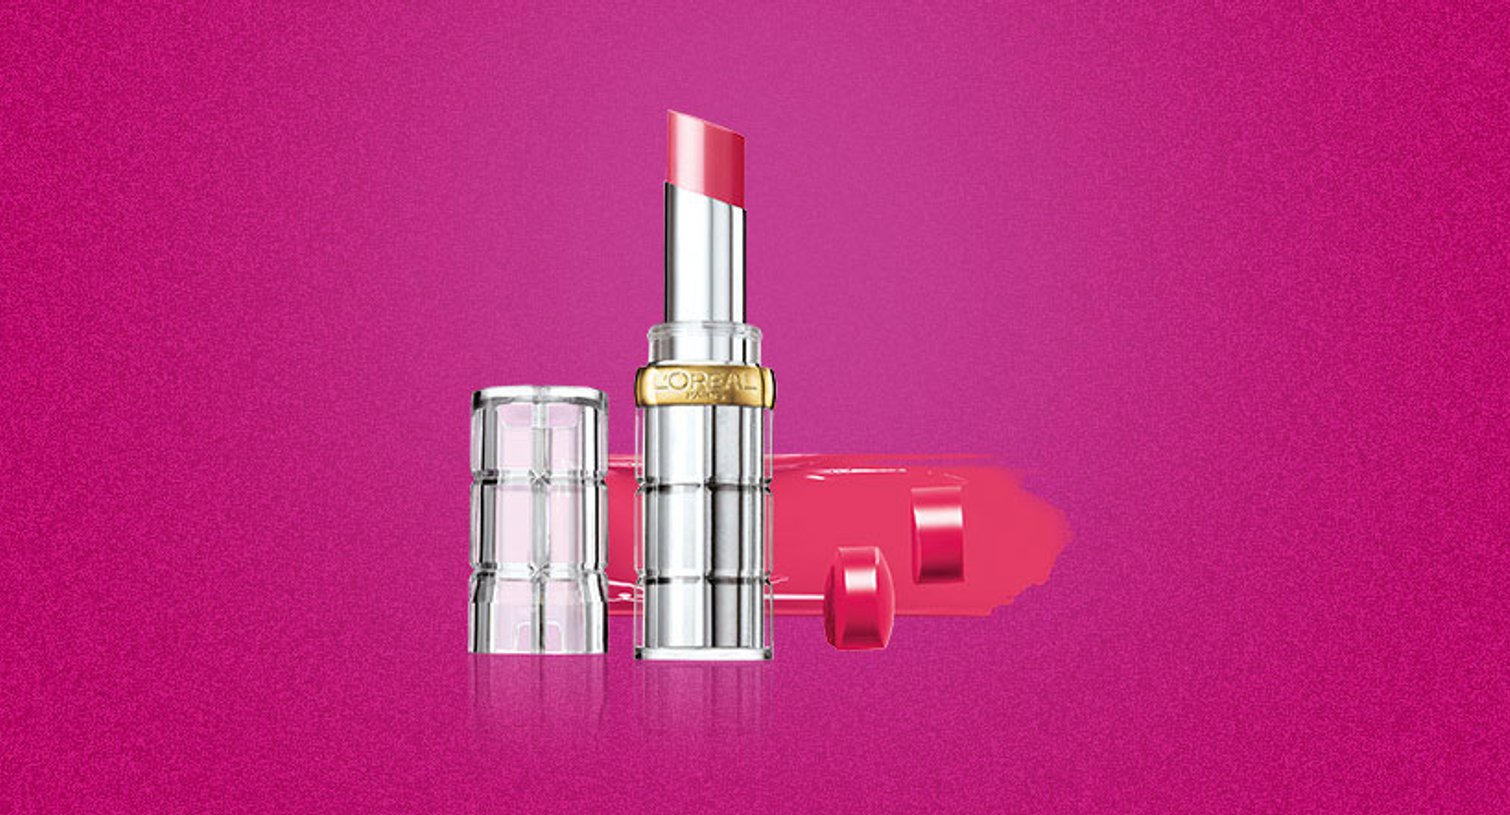 Loreal Paris BMAG Slideshow Our 20 Best Pink Lipsticks For Every Skin Tone Slide15